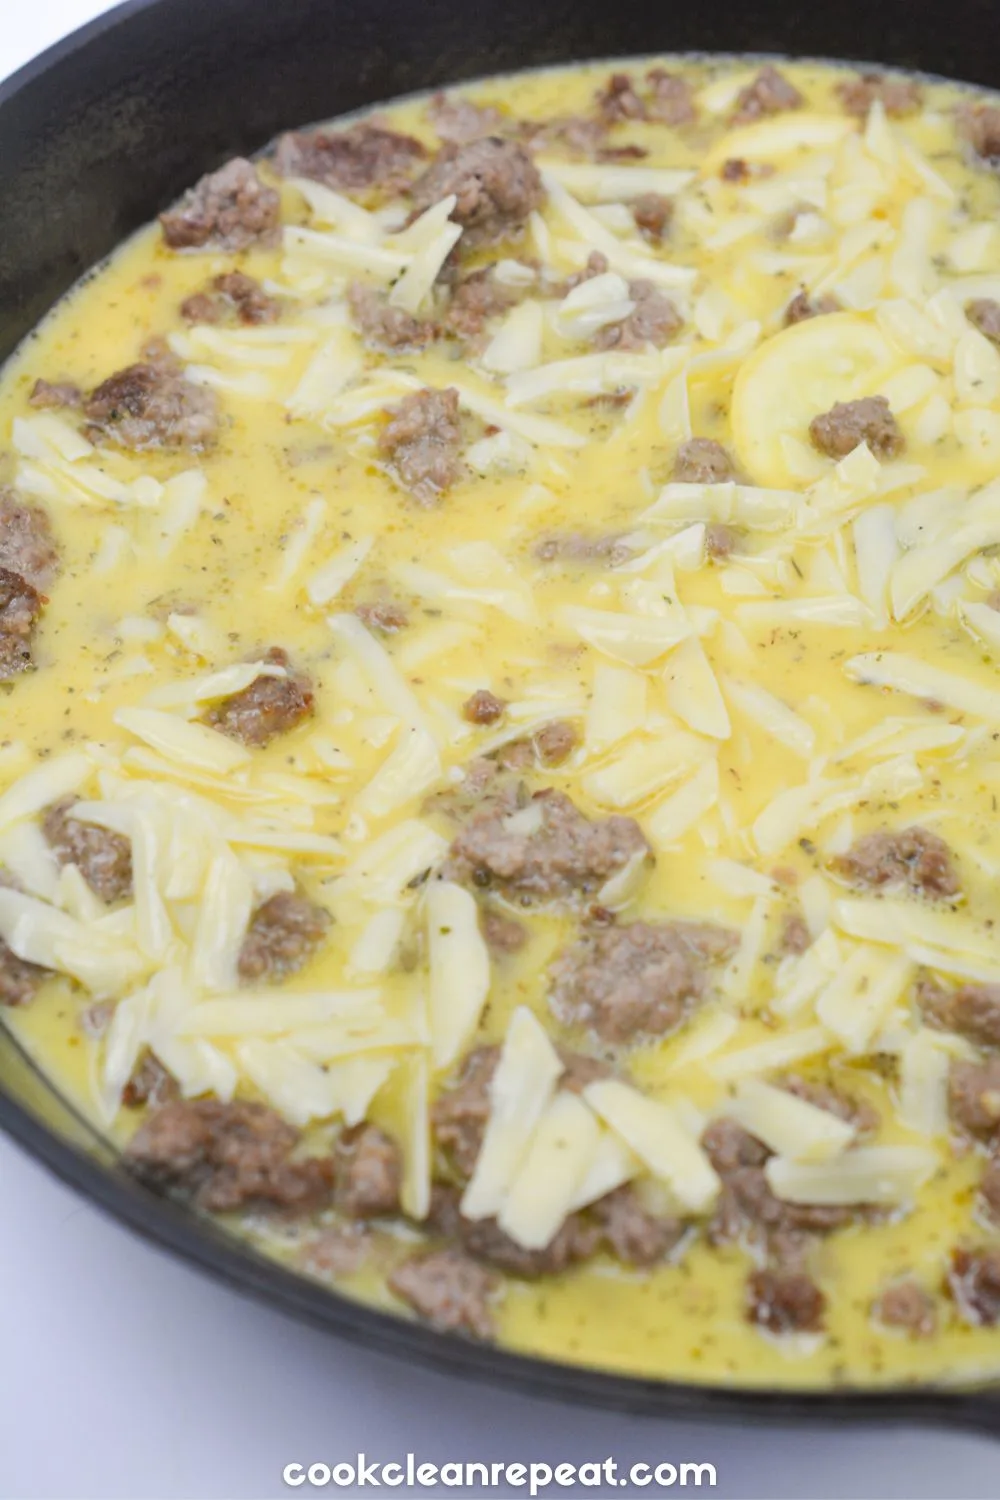 yellow squash cooking with meat and eggs